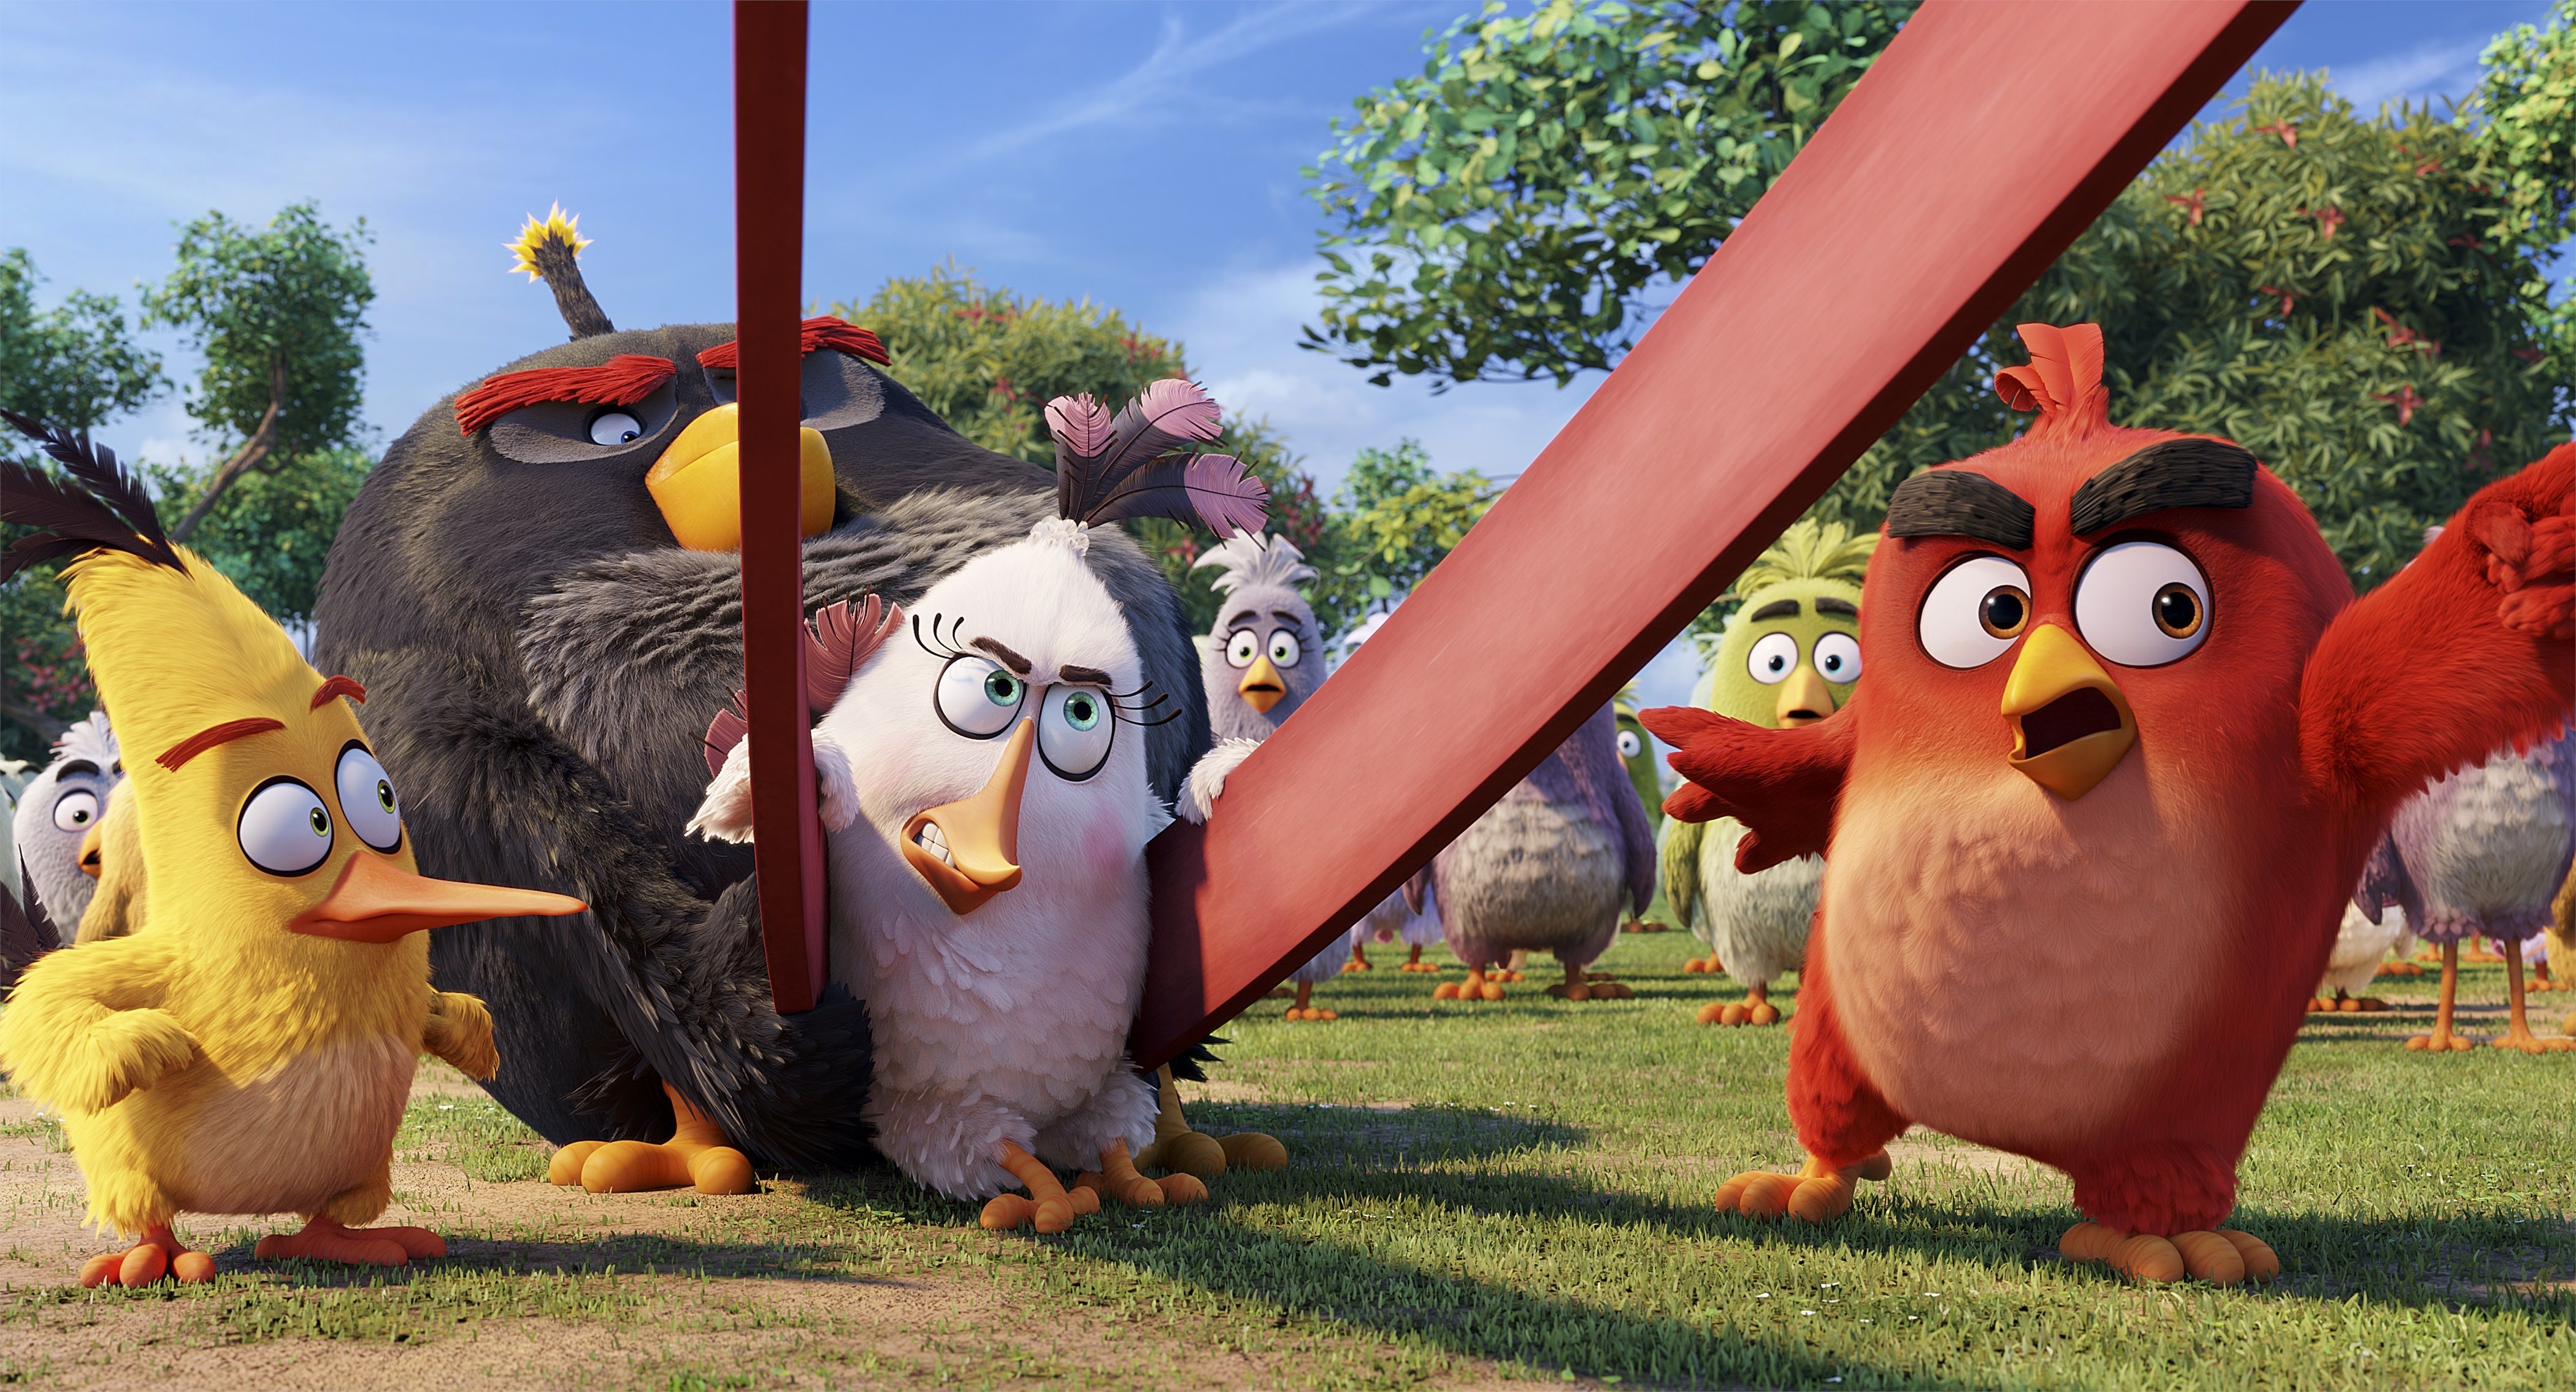 An app comes to life in The Angry Birds Movie. Samoa Observer